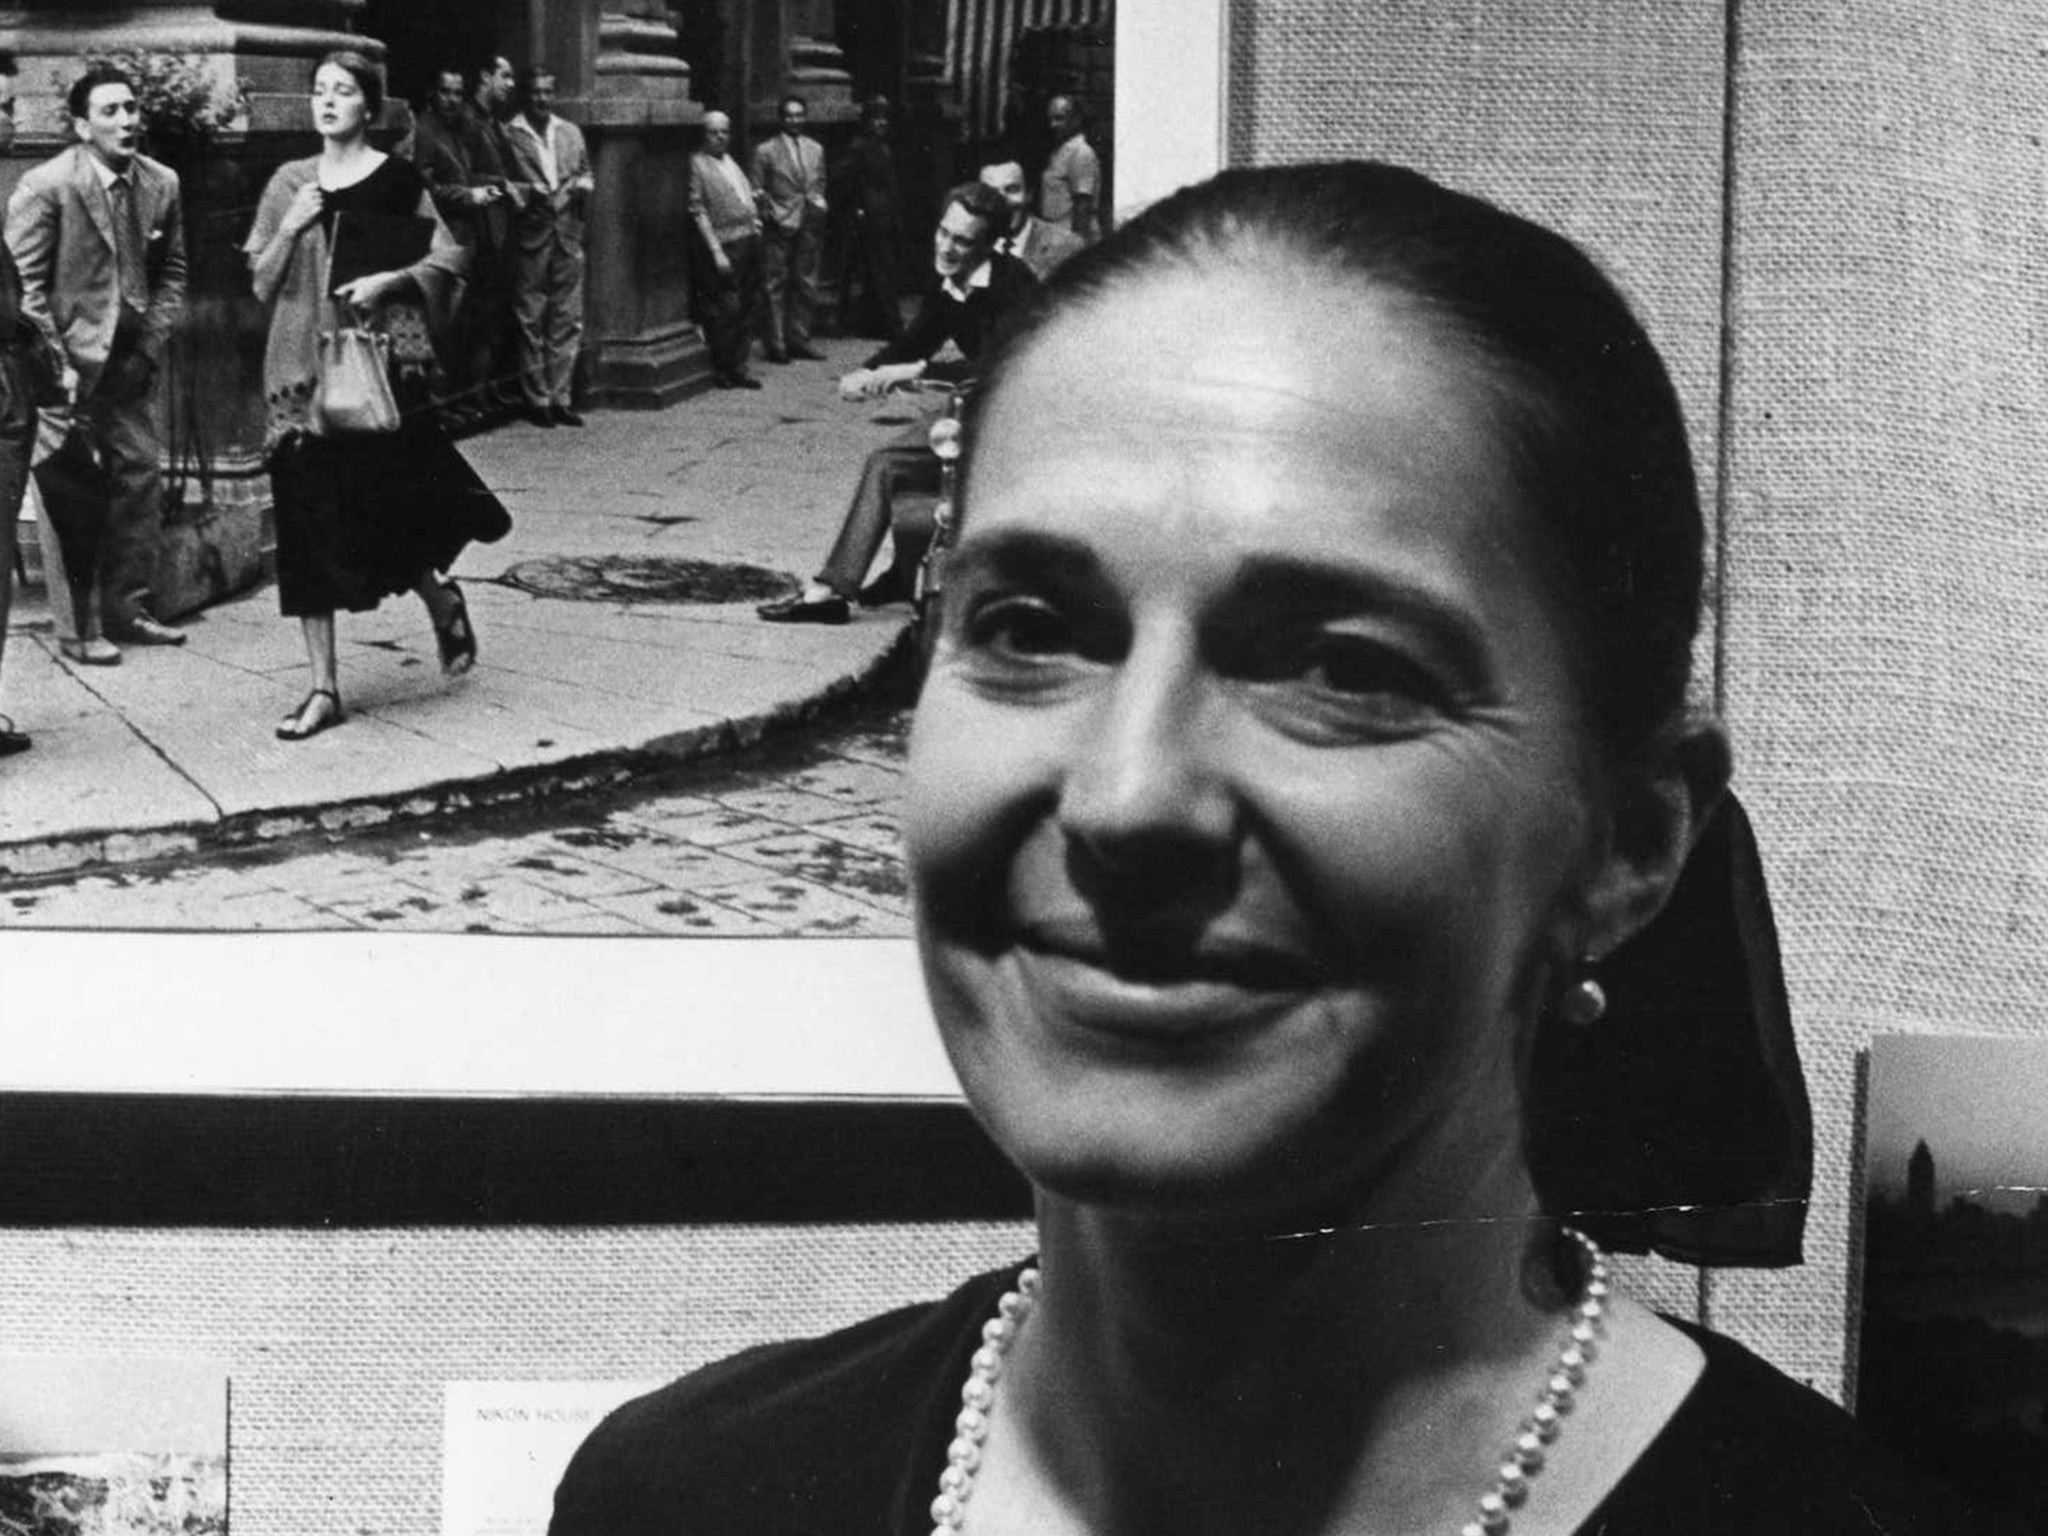 Ninalee Craig in front of Ruth Orkin’s famous image the American Girl in Italy